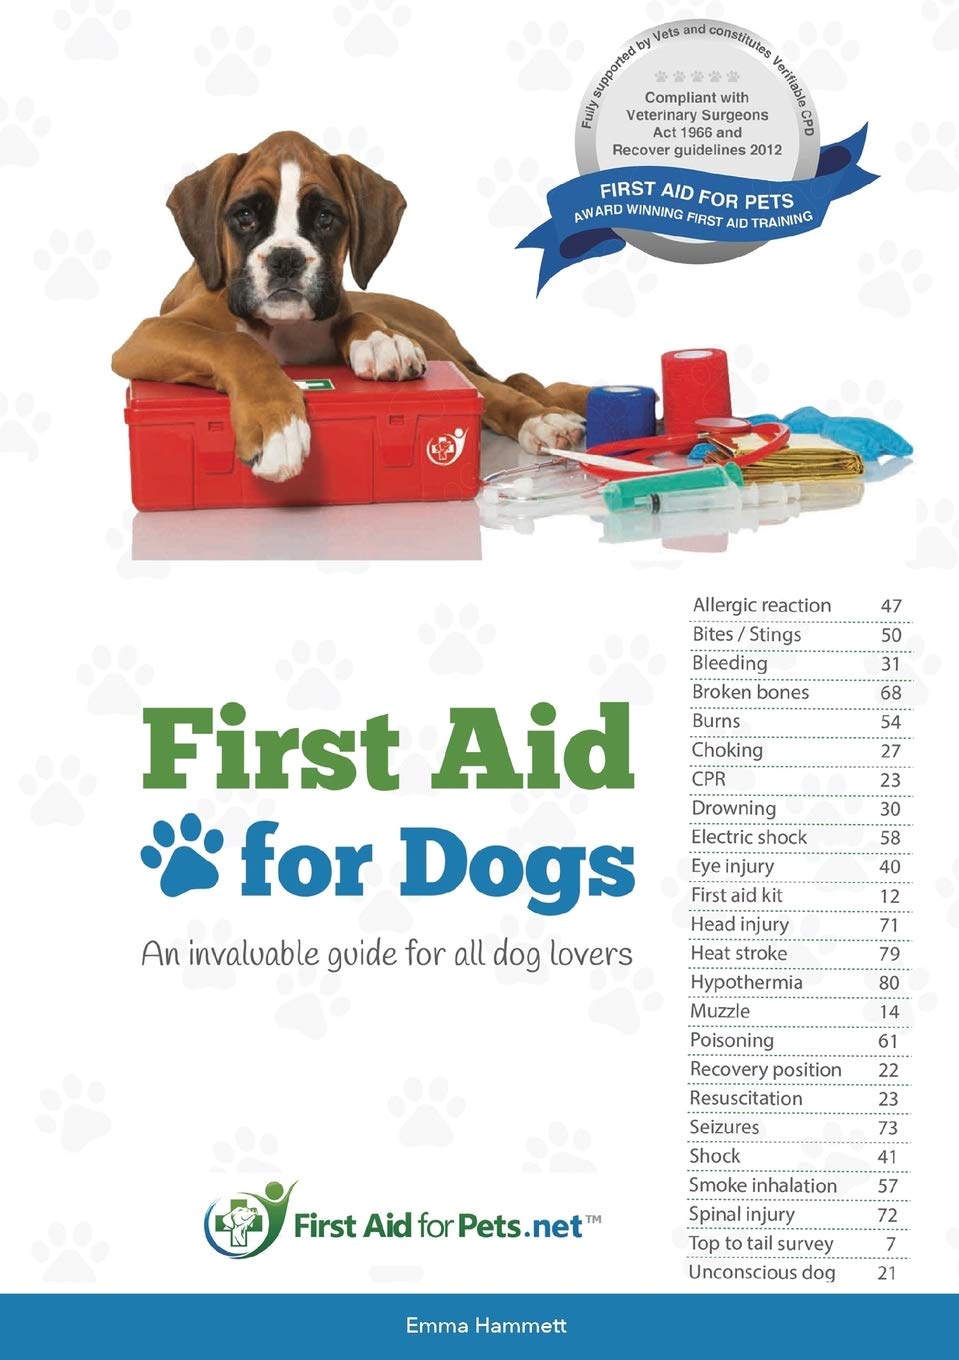 First aid for a dog